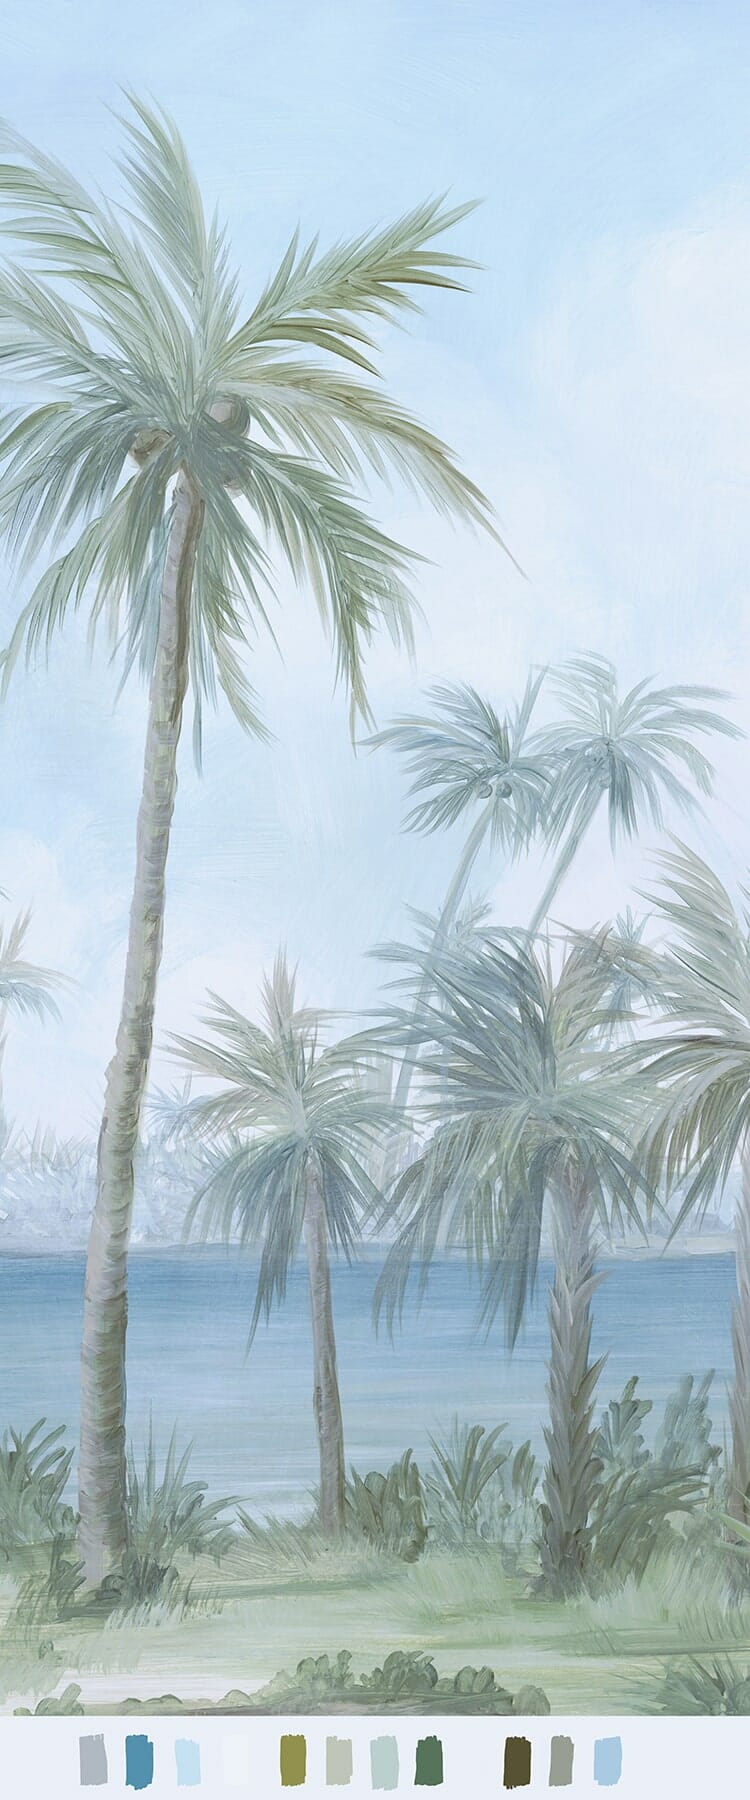 Sample of a hand painted Palm Beach landscape with a palm tree and color swatches at the bottom, blue tones